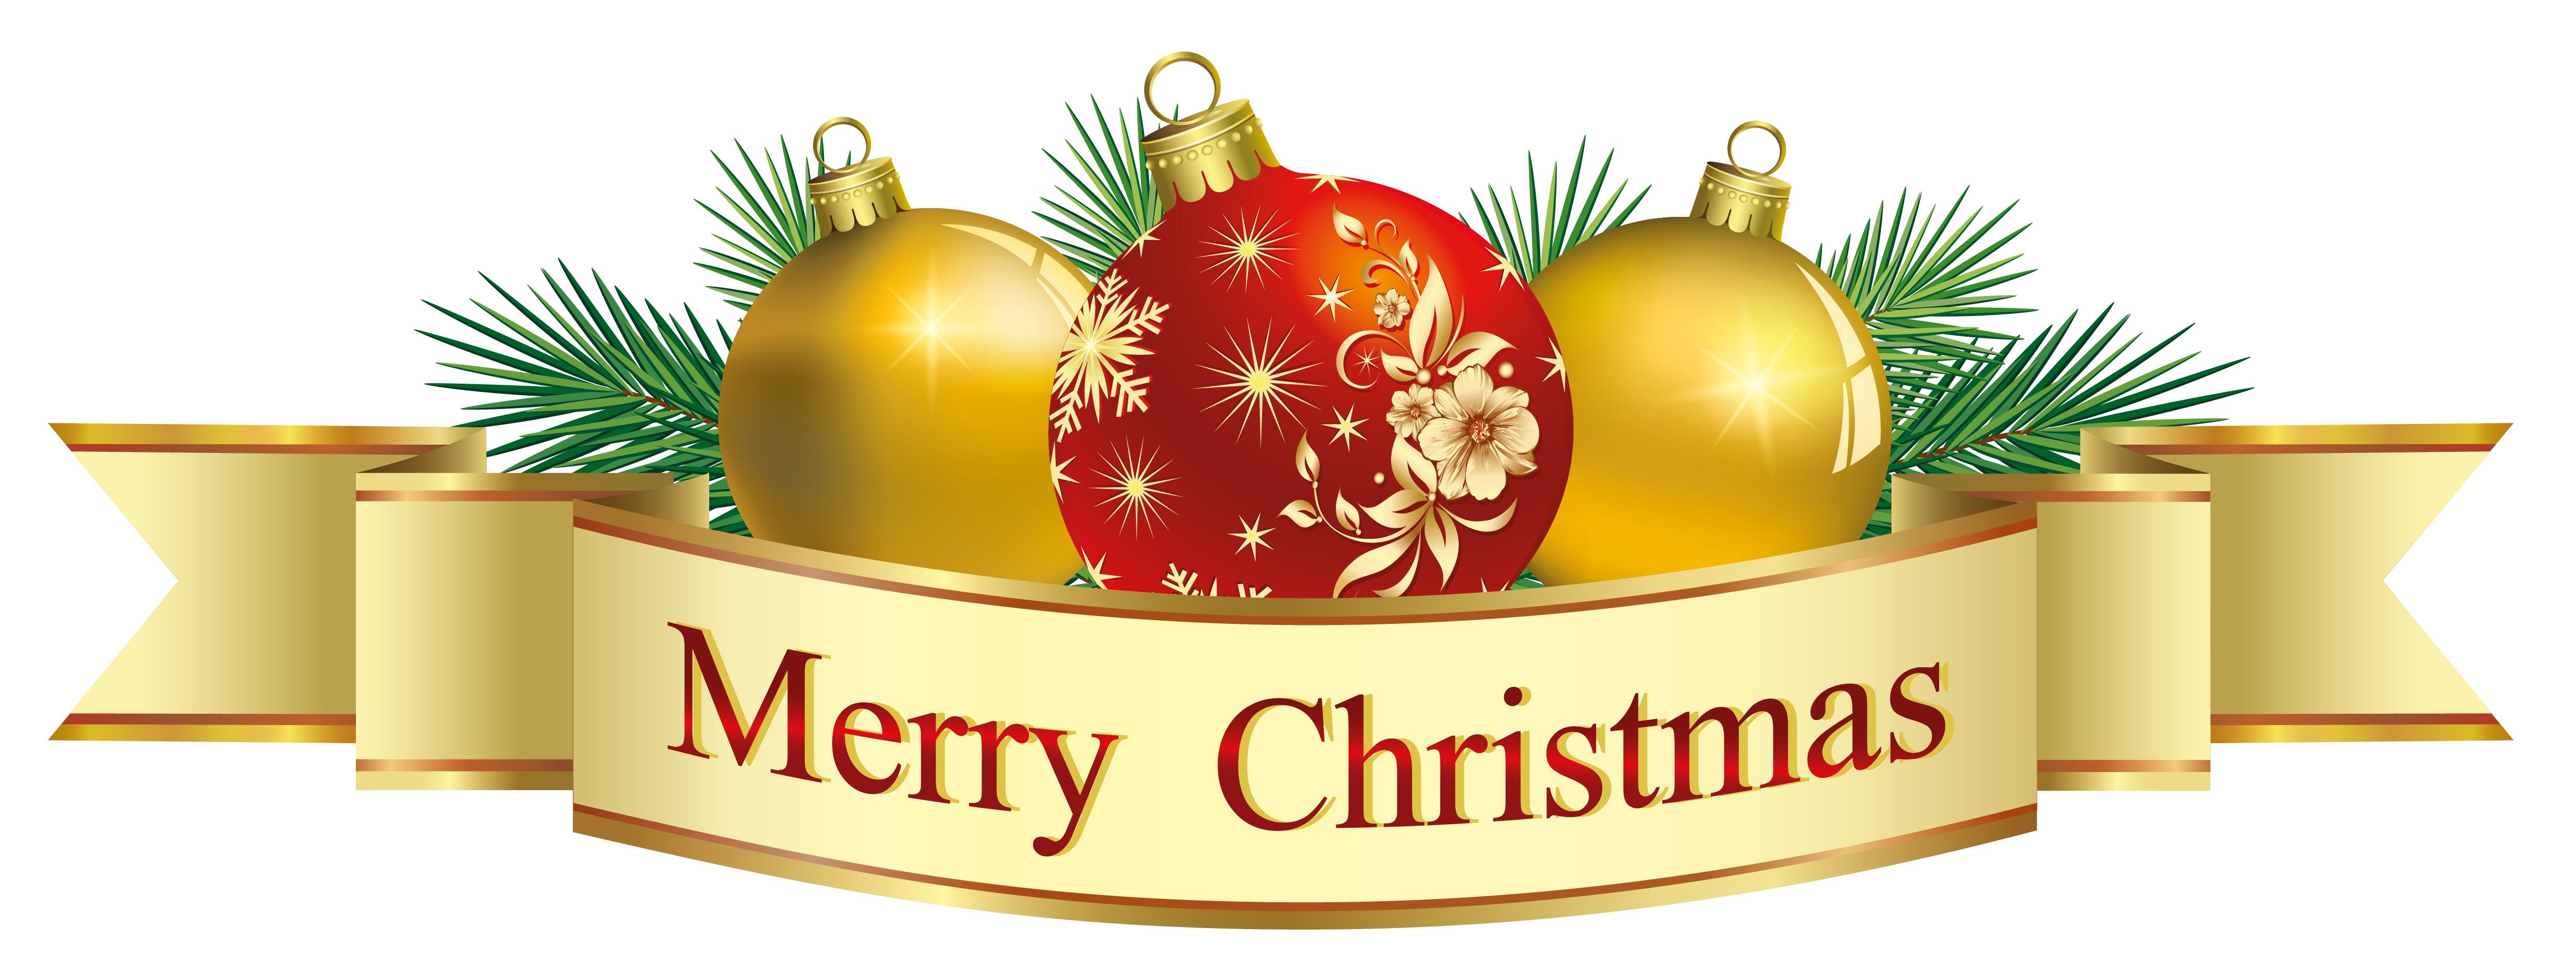 merry-christmas-clip-art-images1-klein-school-0ctsdf-clipart – Beulah Public Library